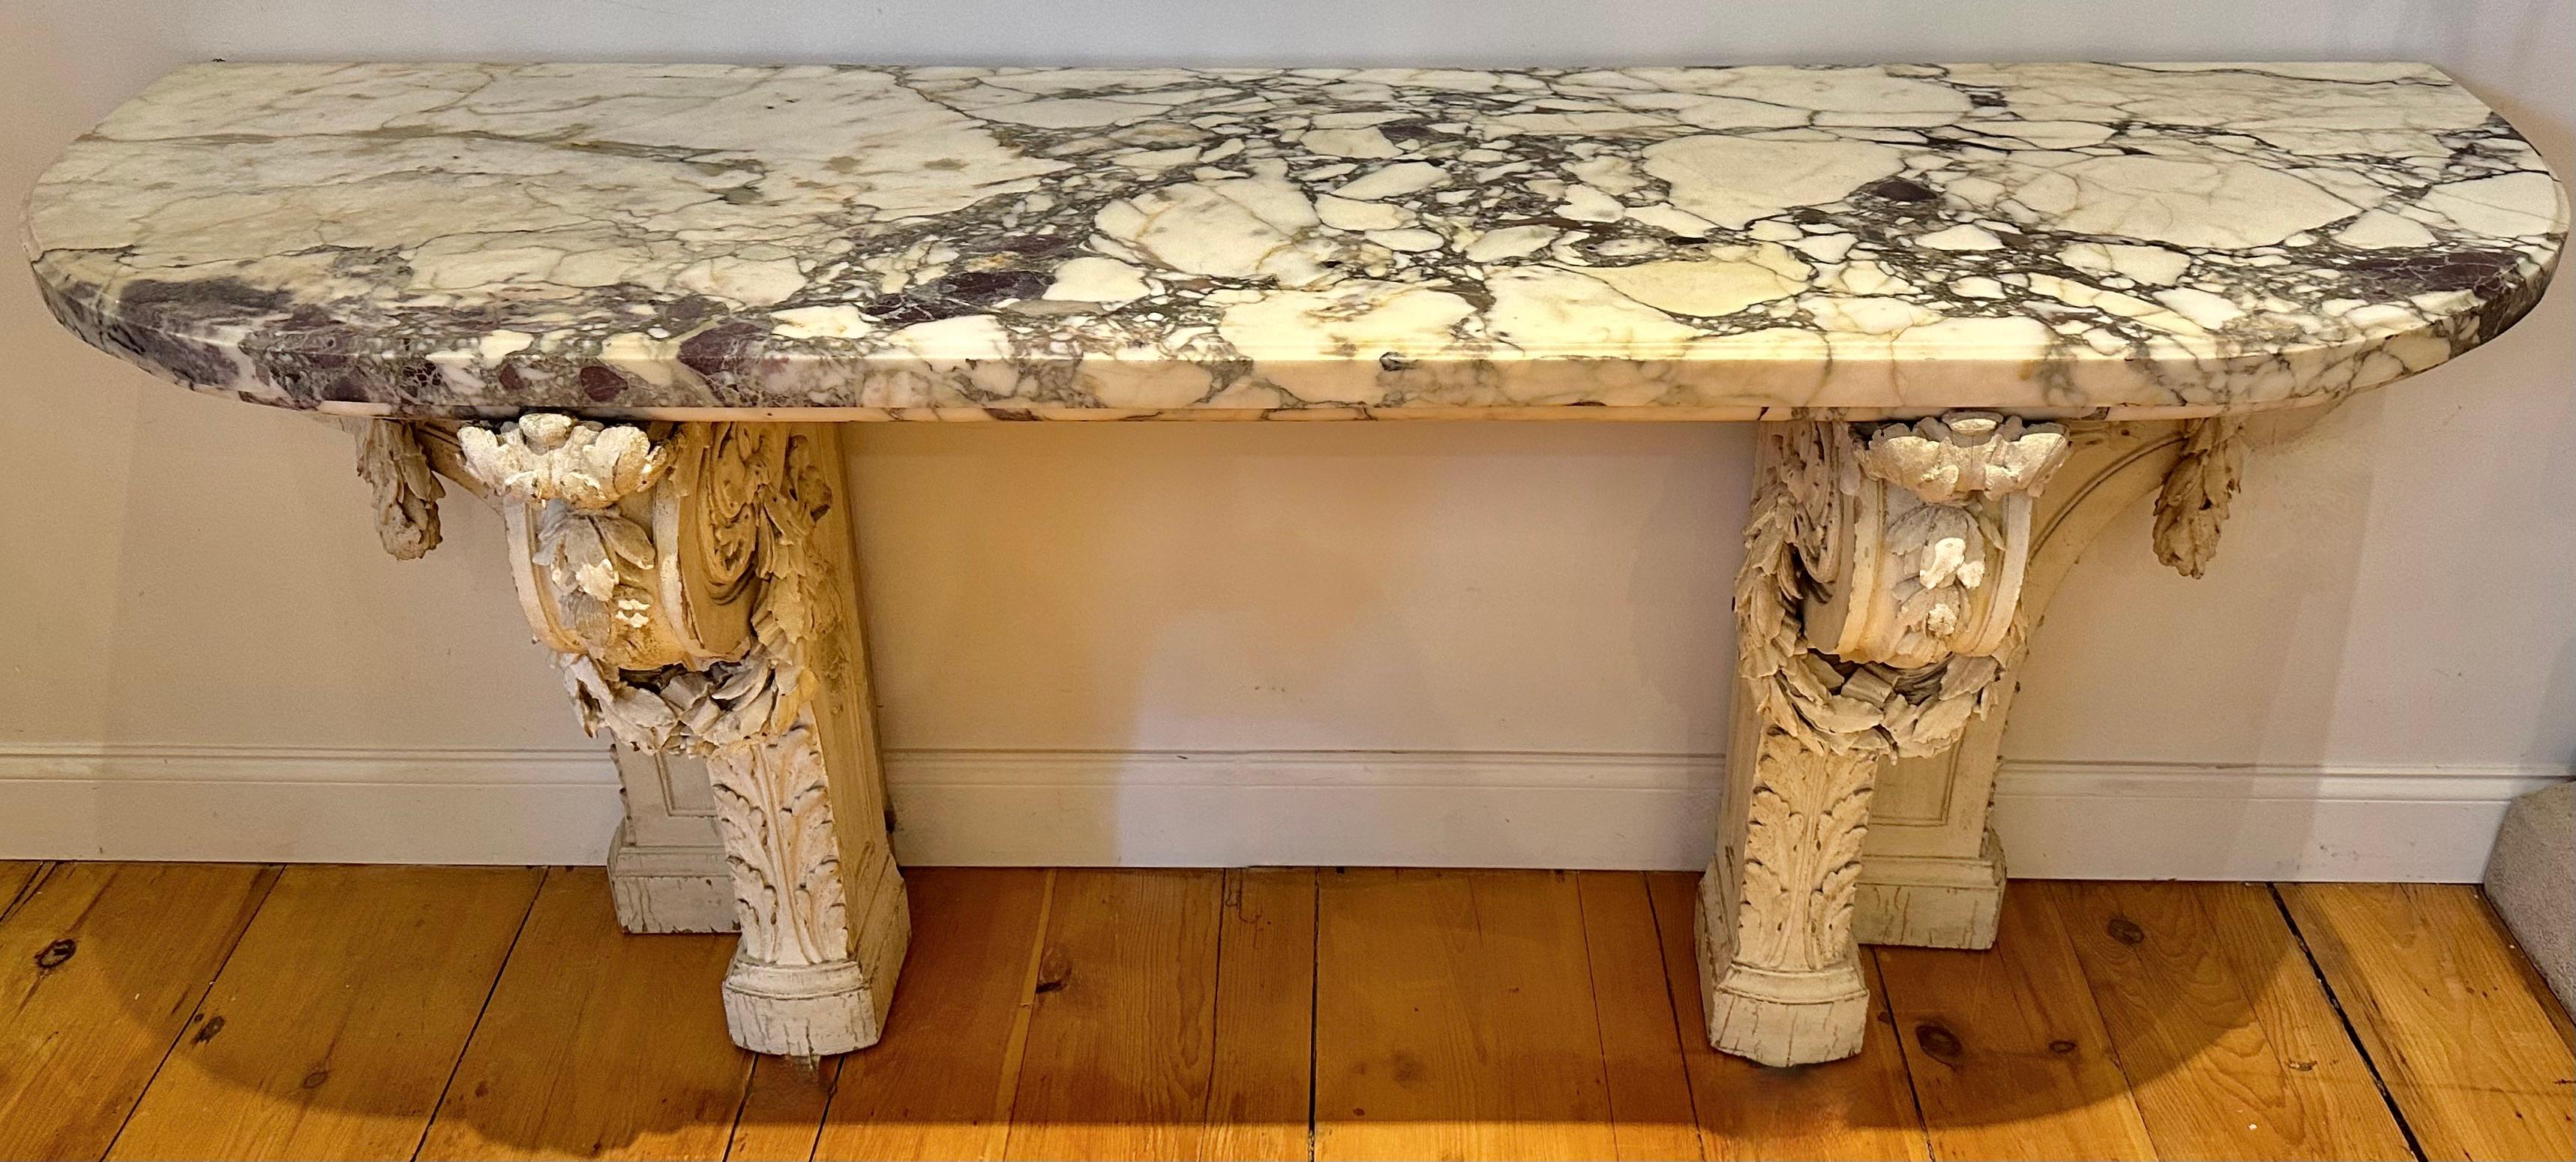 Magnificent 19th Century Louis XVI Neoclassical Marble and Carved Wood Console Table.  Brescia Violeta Marble Top.  Beautifully carved wooden painted pedestals of laurel swags.  Quite substantial with great presence.

Provenance:  Private